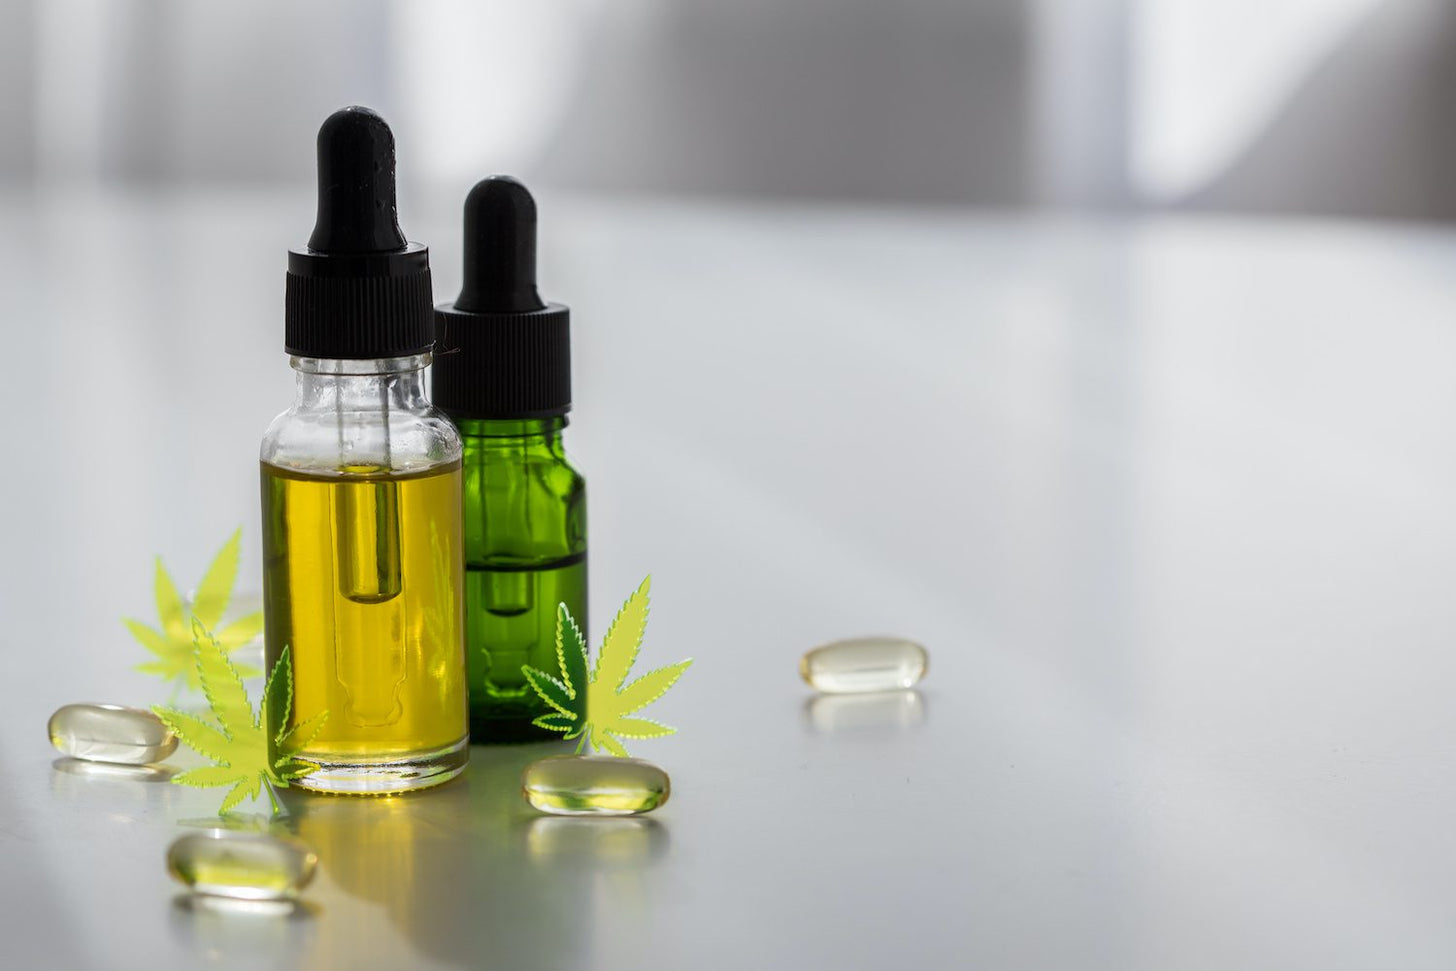 Two bottles of CBD oil stand on a white surface with gel capsules strewn around their bases